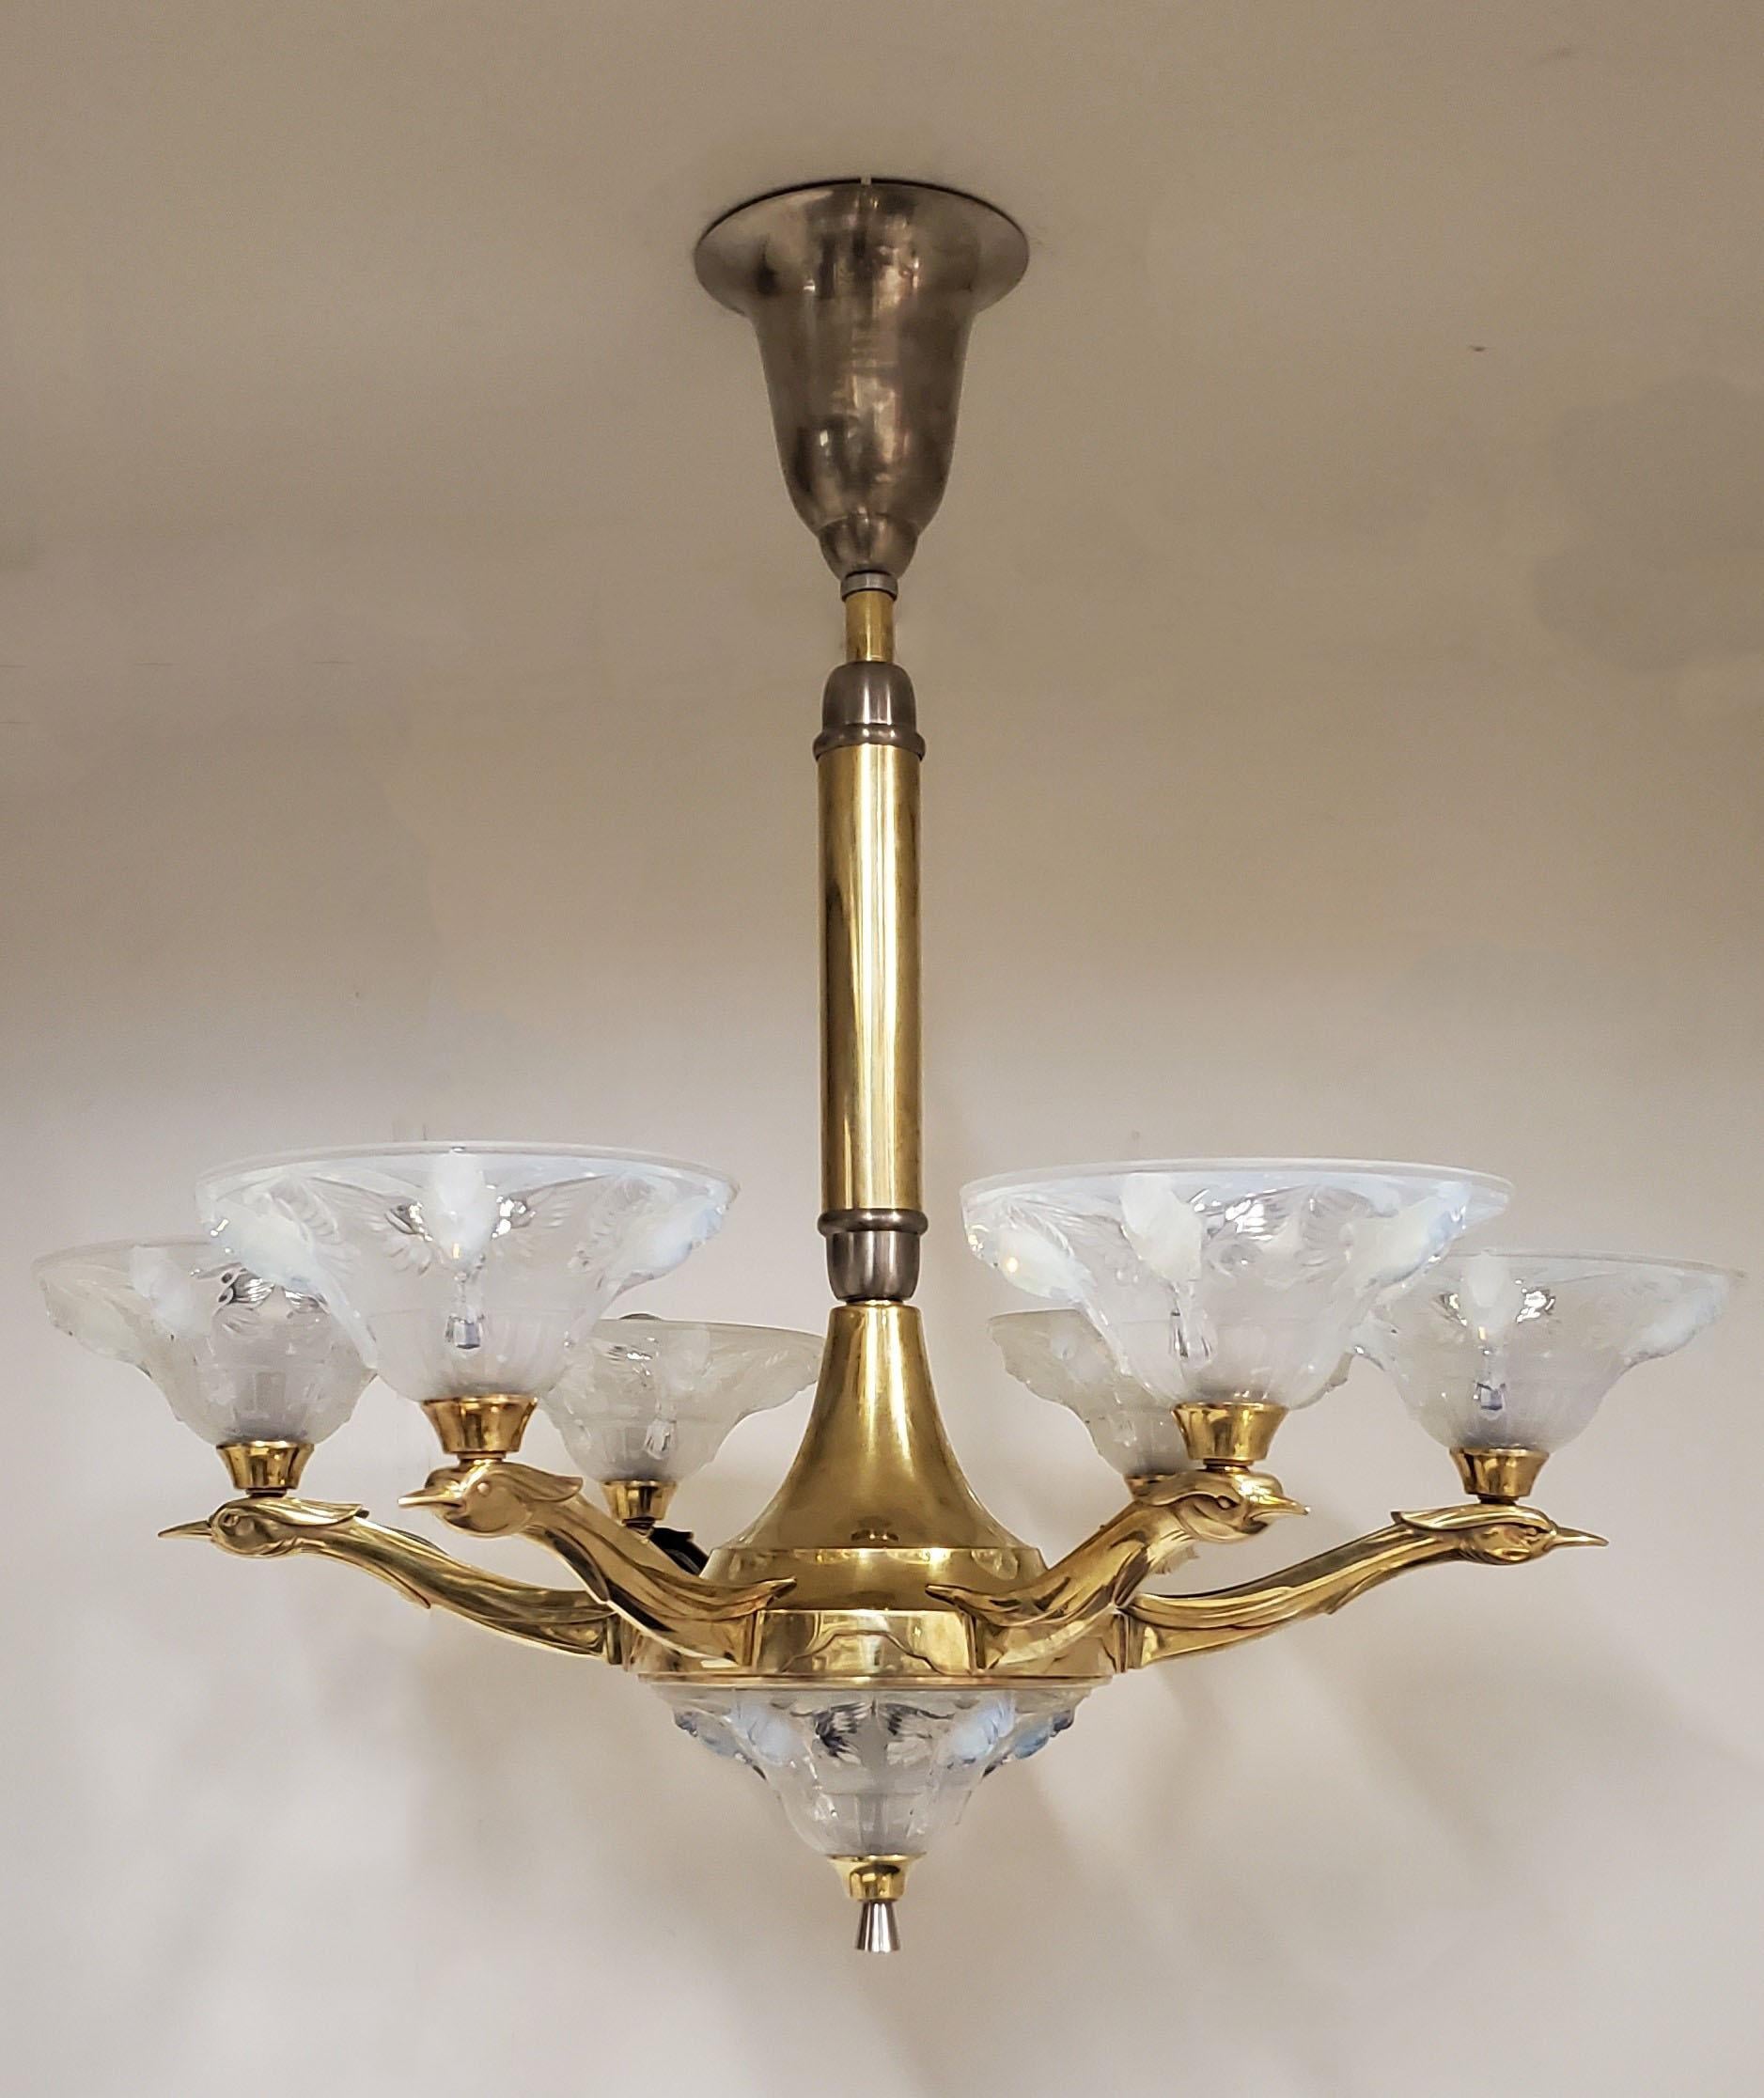 A striking original French Art Deco heavily molded opalescent art glass chandelier circa 1930,  by Jean Boris Lacroix featuring a dramatic and organic design with six sinuous arms portraying birds in flight.  Signed LA+ on each shade
1902-1984 Jean